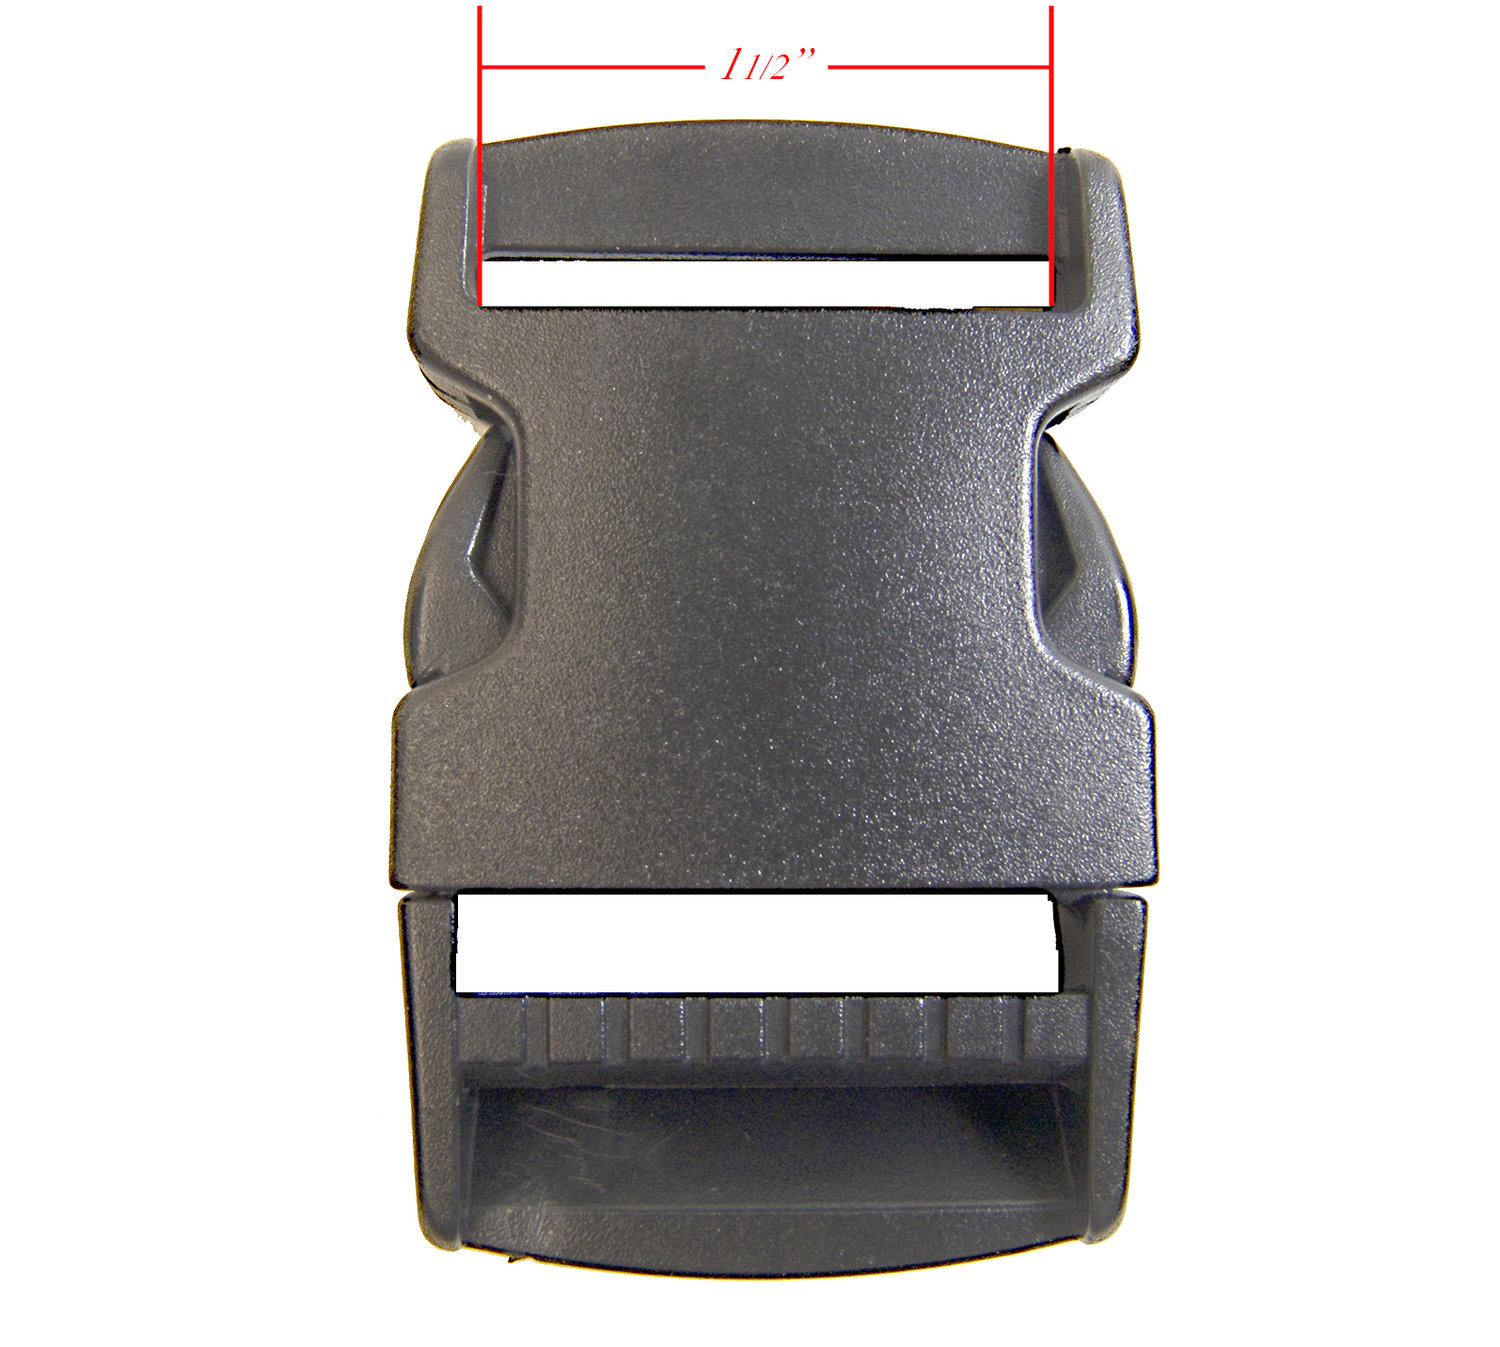 Quick Side Release Buckle,Heavy Duty Plastic Snap Buckle Clip Clasp  Fasteners Backpack Buckle Replacment for Strap